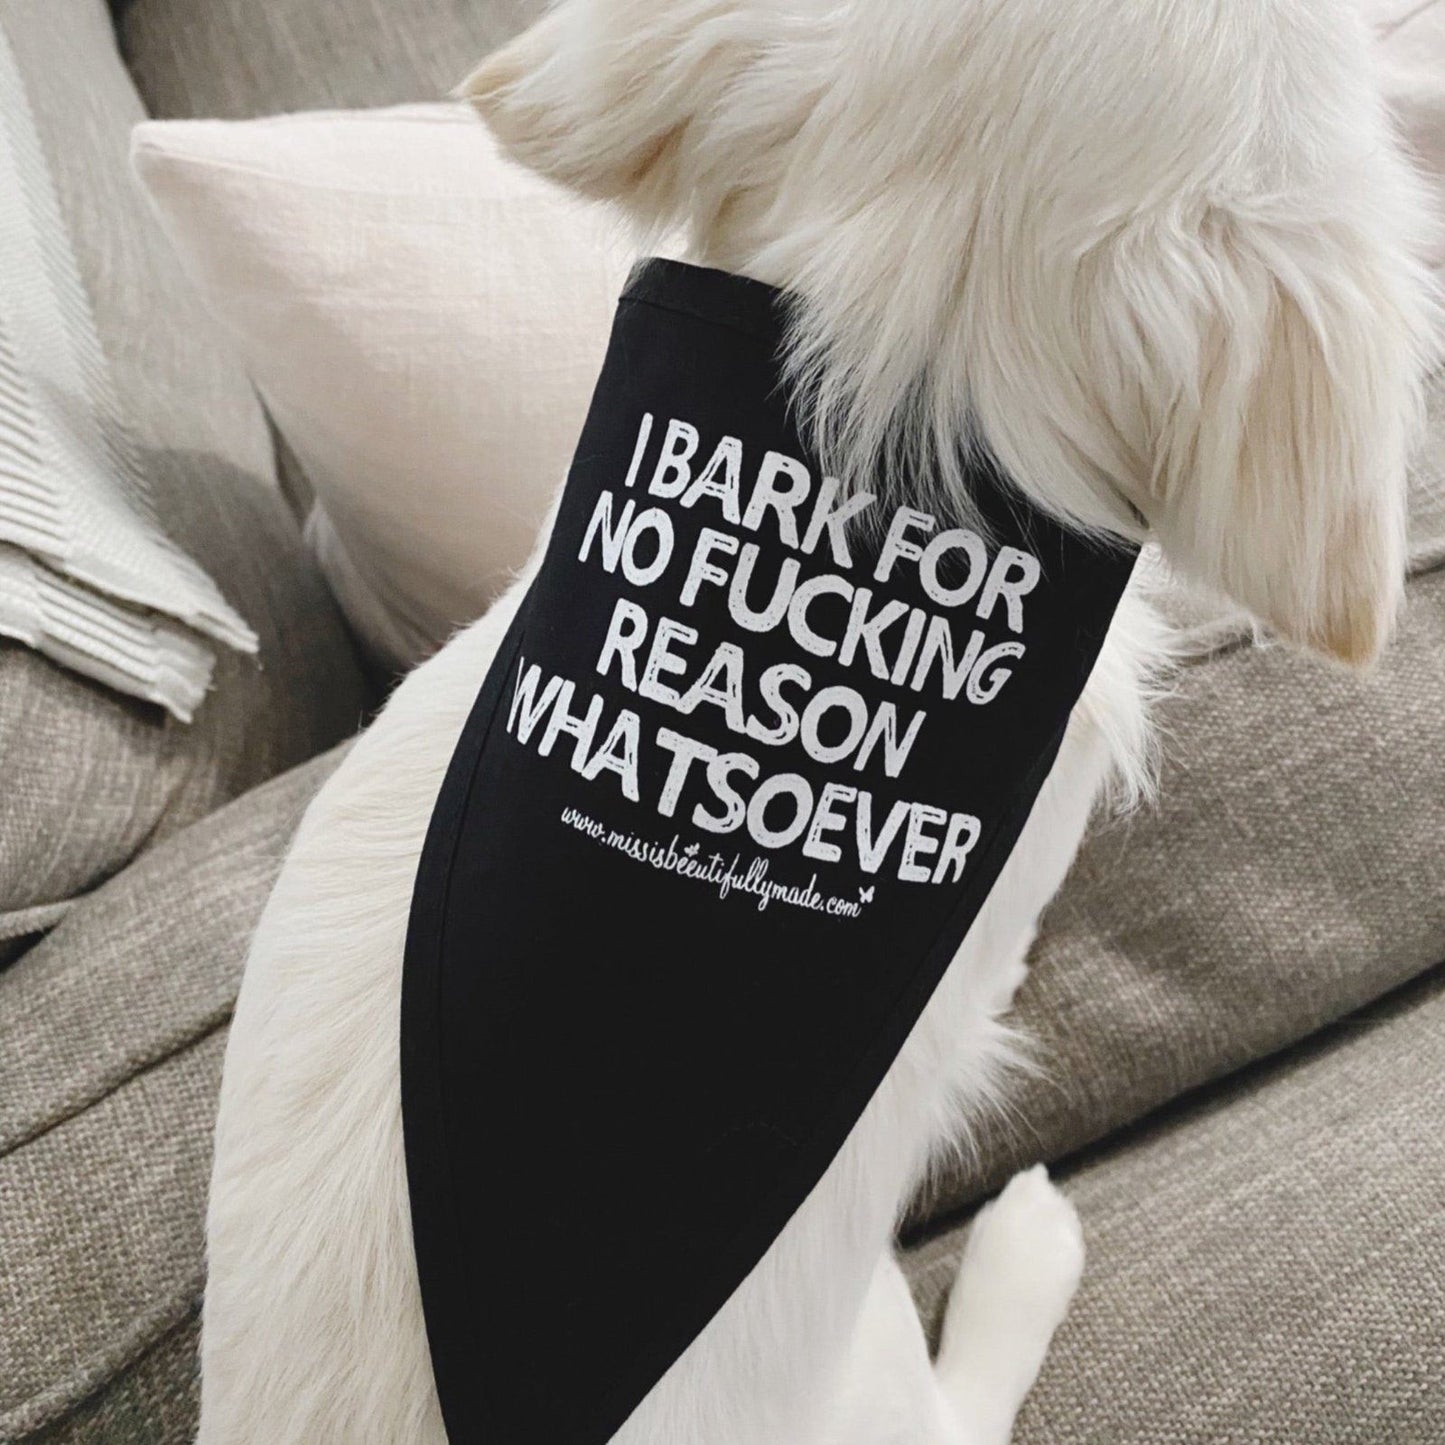 Cotton dog bandana in pink or black with the quote I bark for no fucking reason whatsoever. Tie around strings and single layered fabric